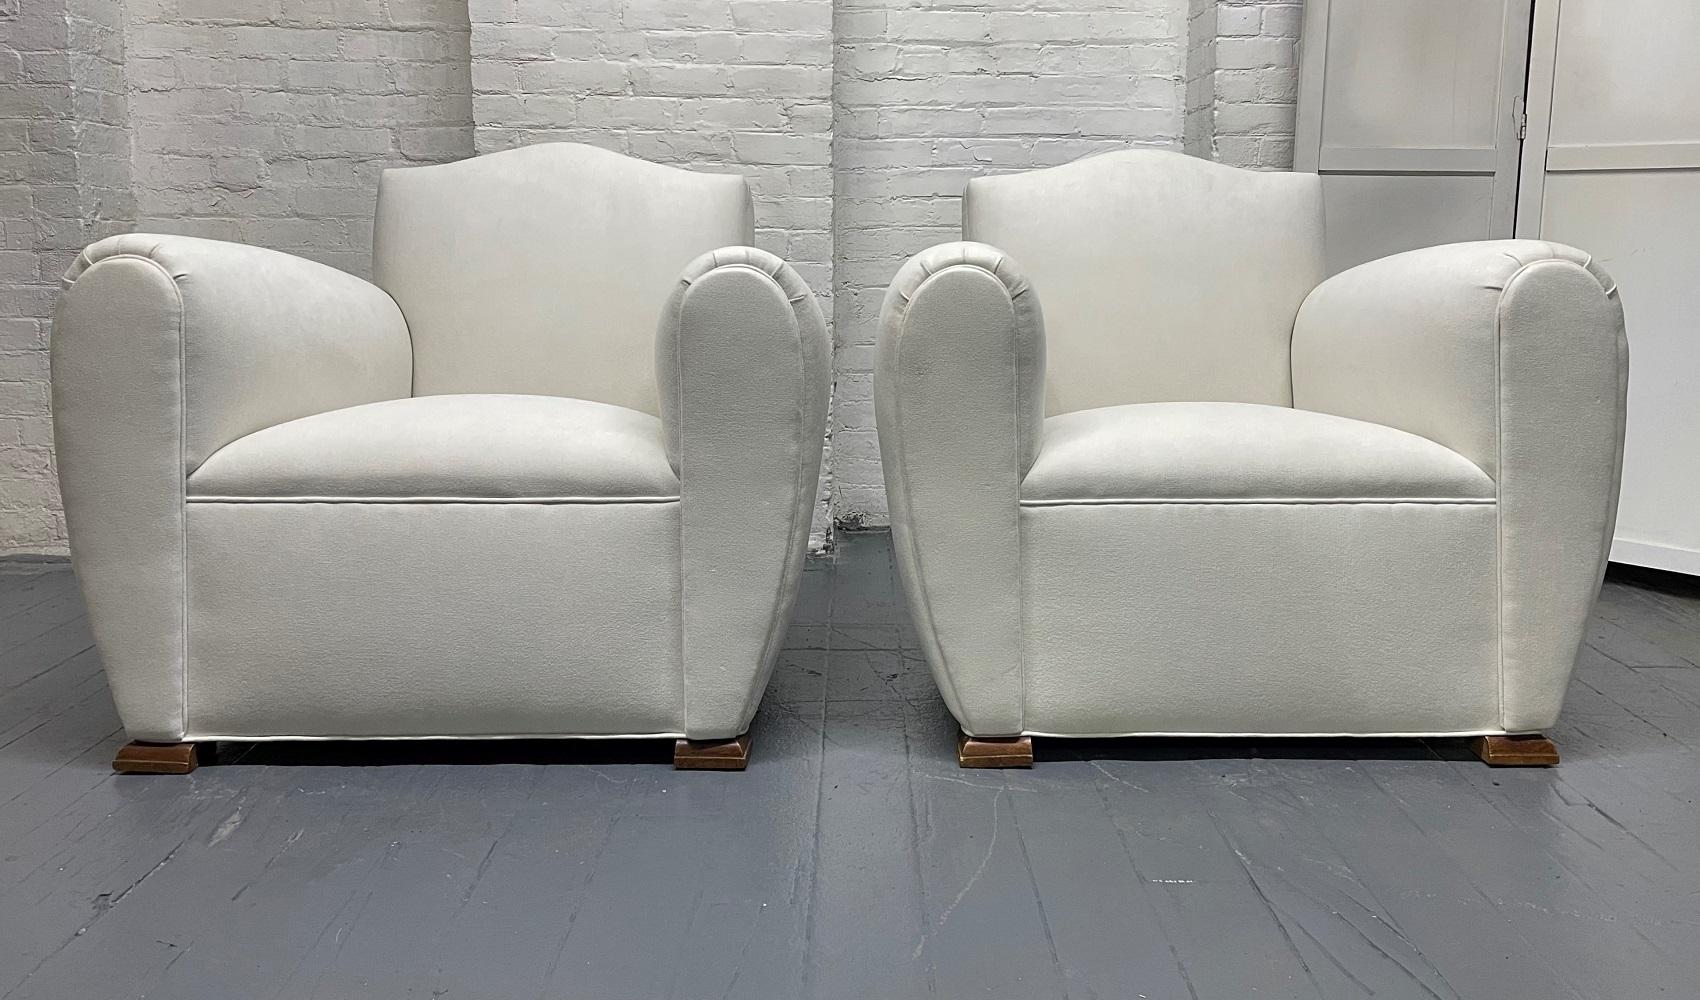 Pair of 1940s Art Deco newly upholstered lounge chairs. The chairs have solid walnut bracket feet, and the chairs are oversized.